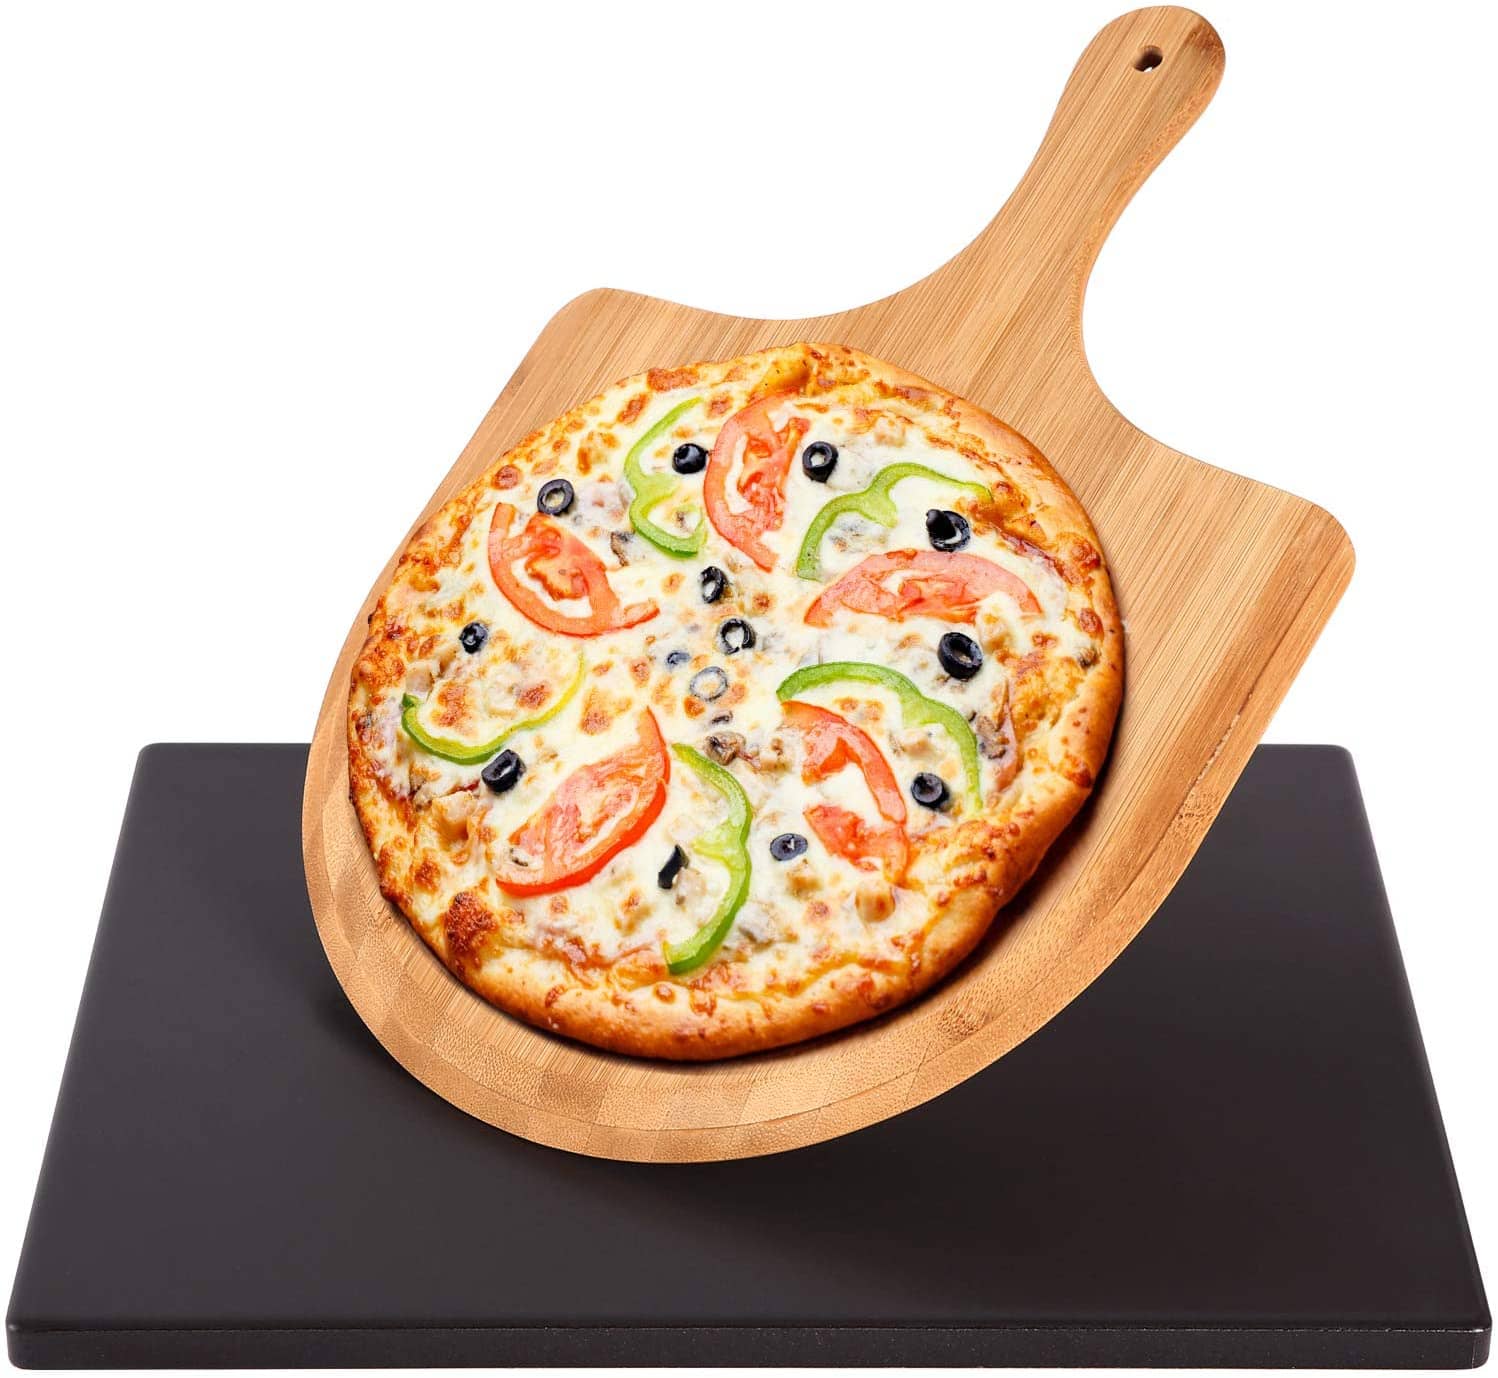 How to Choose the Best Pizza Baking Stone